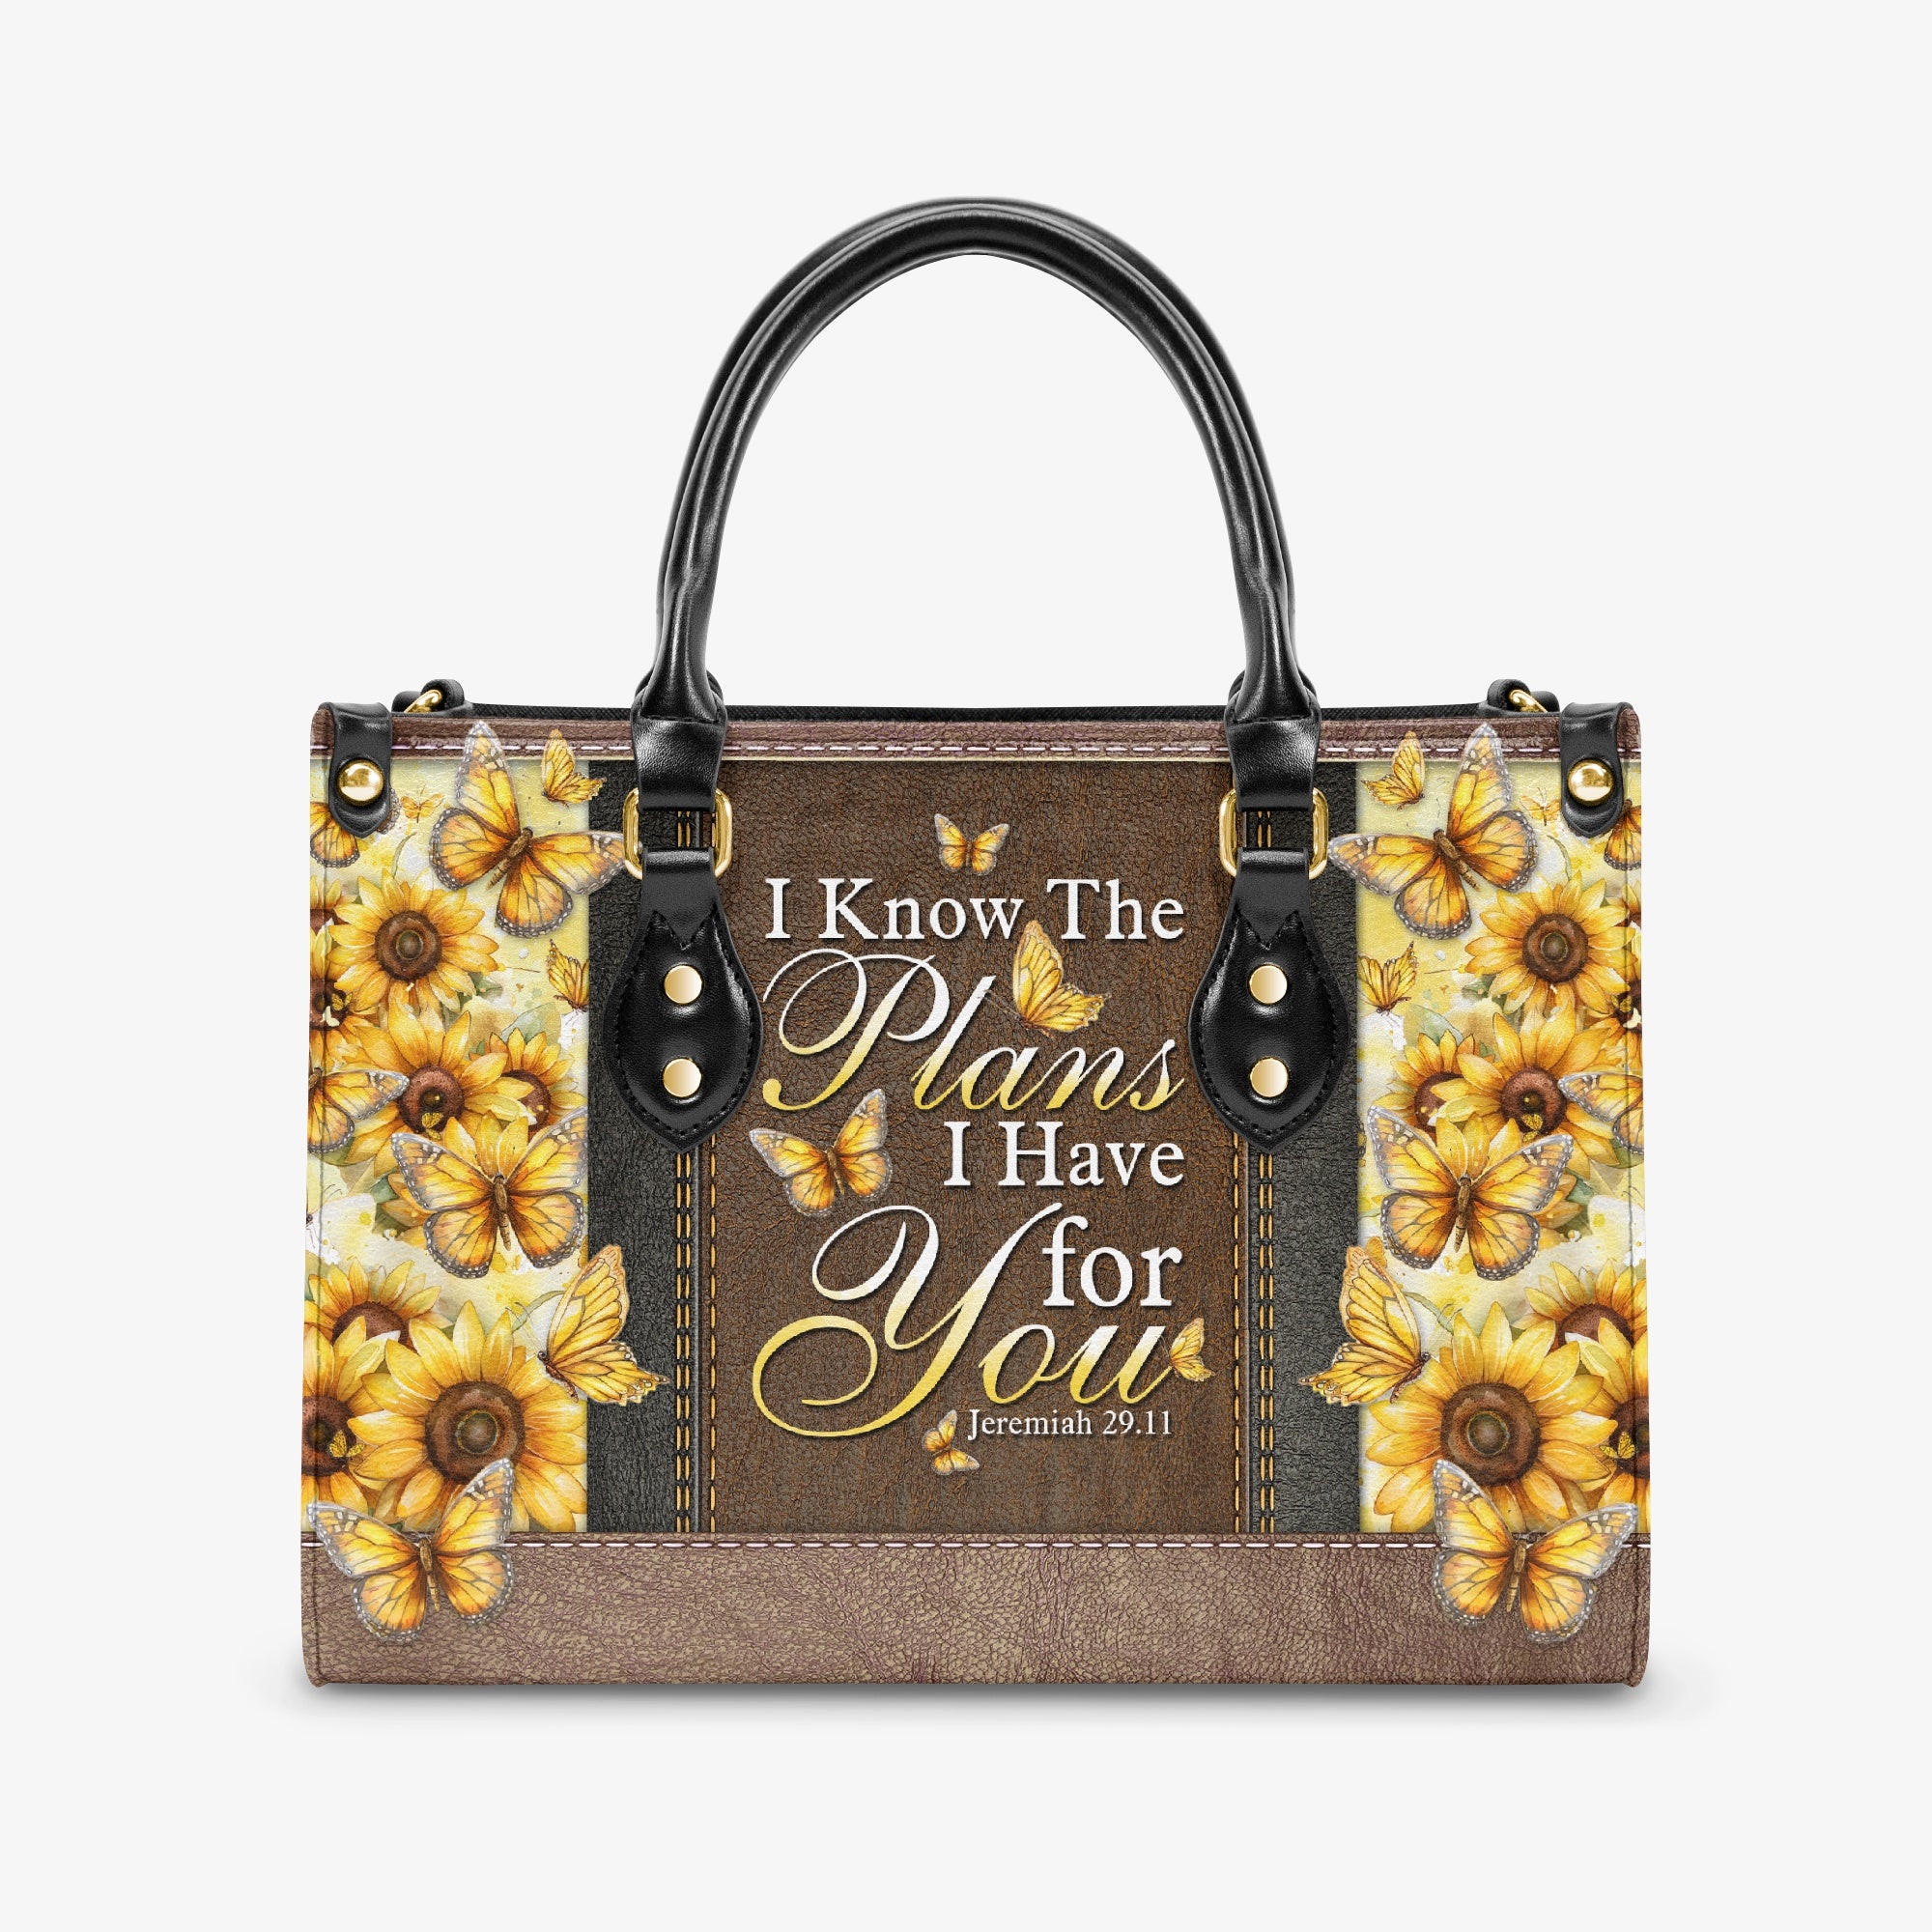 I Know The Plans I Have For You Leather Handbag - Tytd0404242